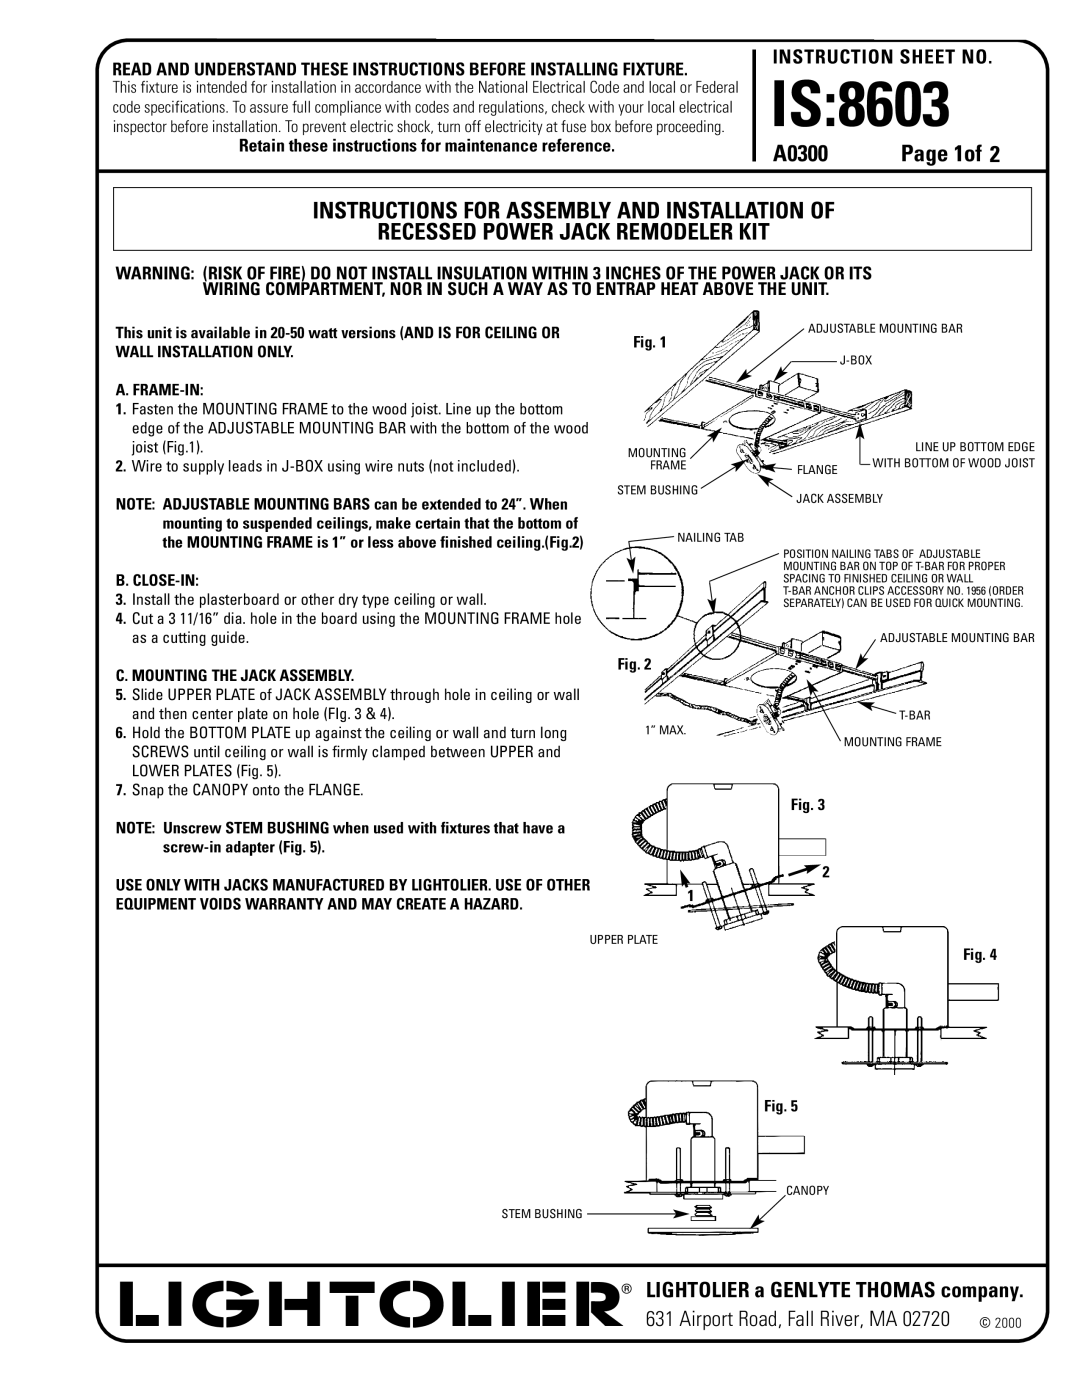 Lightolier 8603 instruction sheet Is, A0300, Instructions For Assembly And Installation Of, Instruction Sheet No, Page 1of 